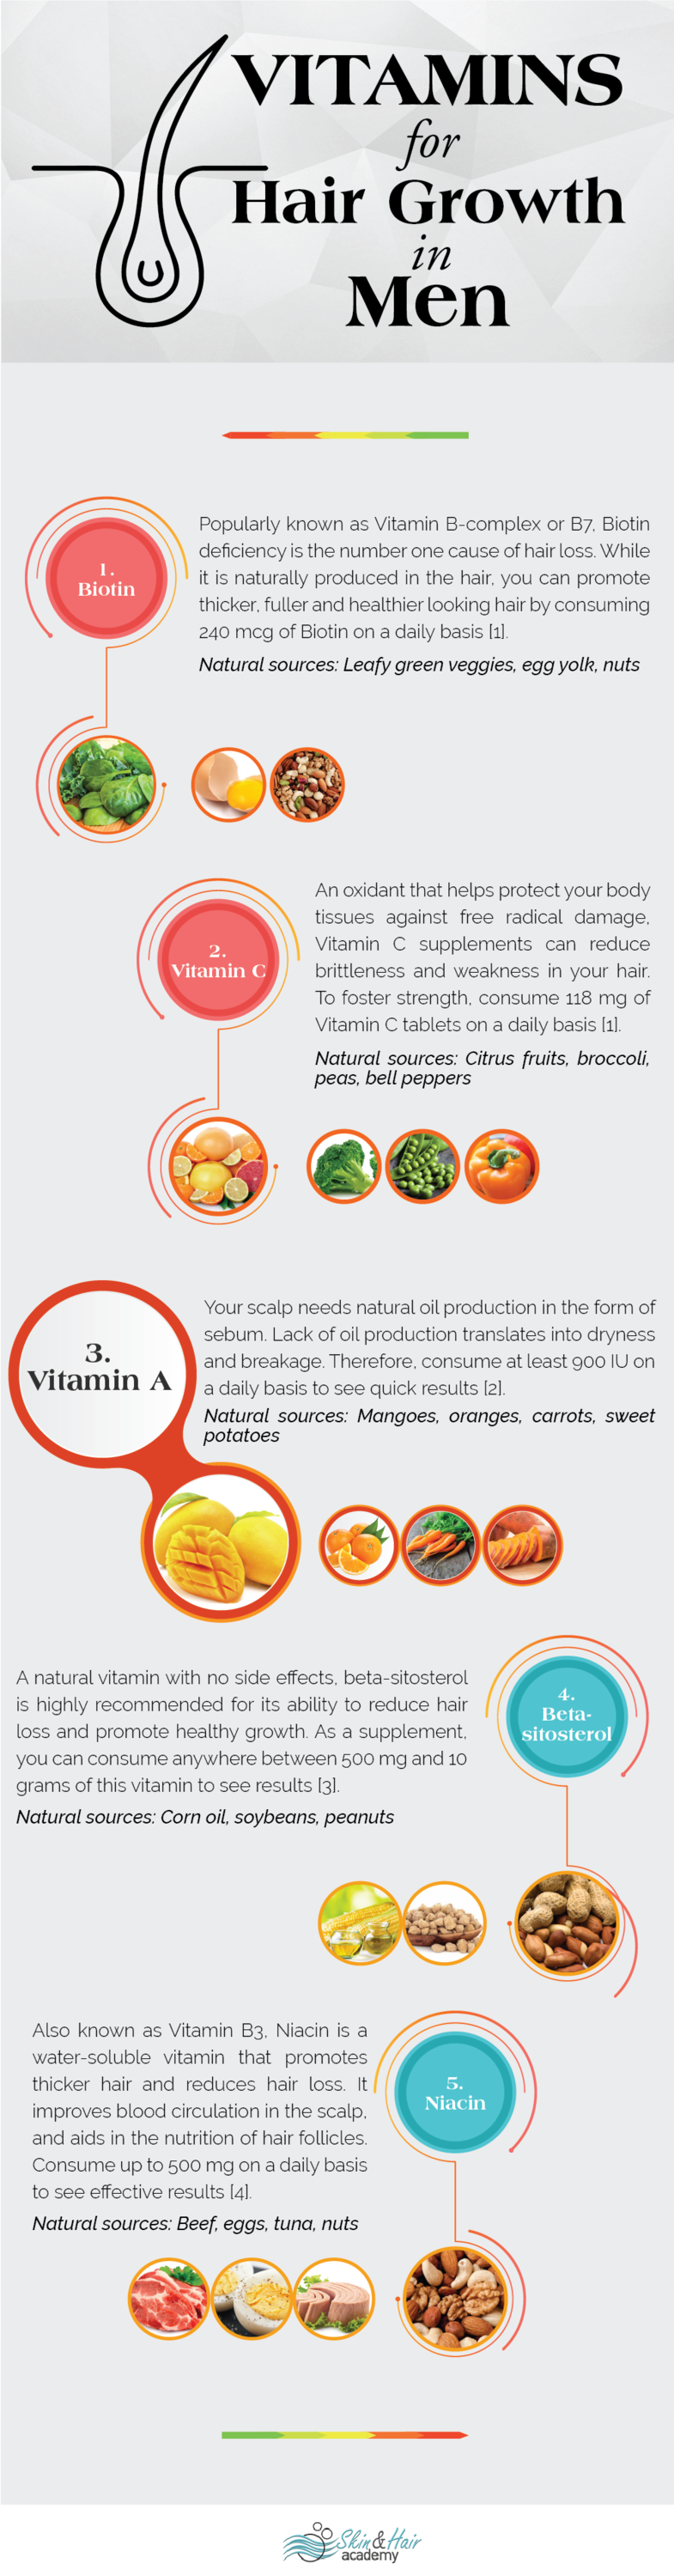 vitamin supplements for beard growth